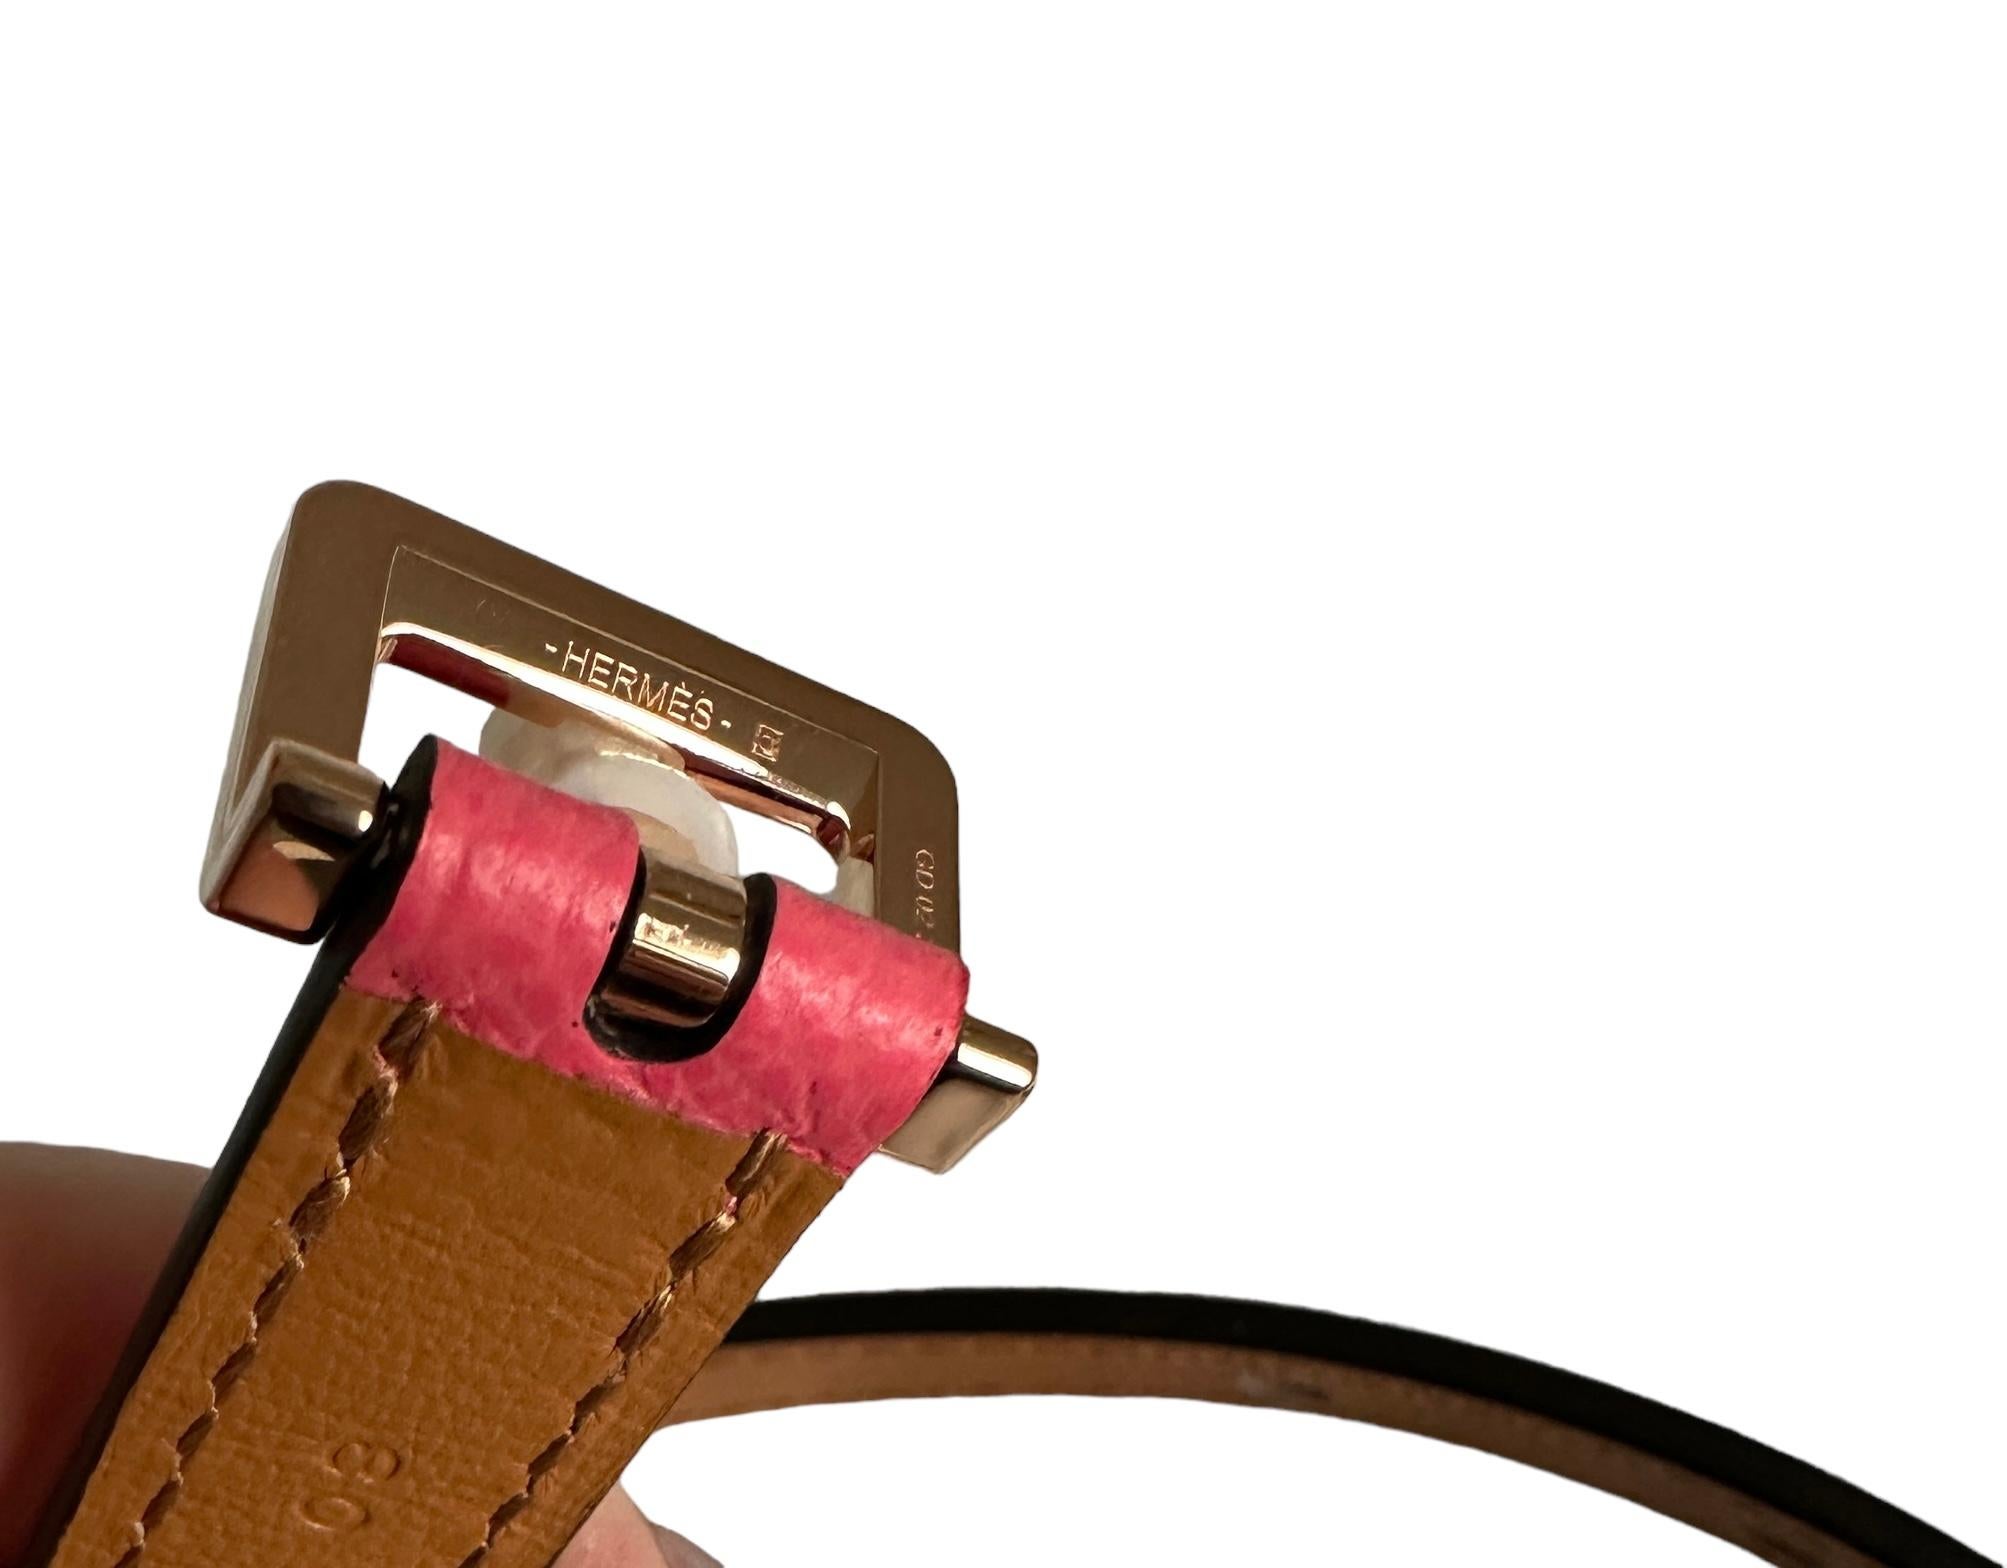 POP H belt 
Color is Rose Azalea
Brand new never used
Pop H belt buckle 
Leather belt in Epsom calfskin with rose gold-plated buckle.
The iconic Pop H blends in, tone-on-tone, in the role of a loop passing on a thin and feminine belt.

Made in